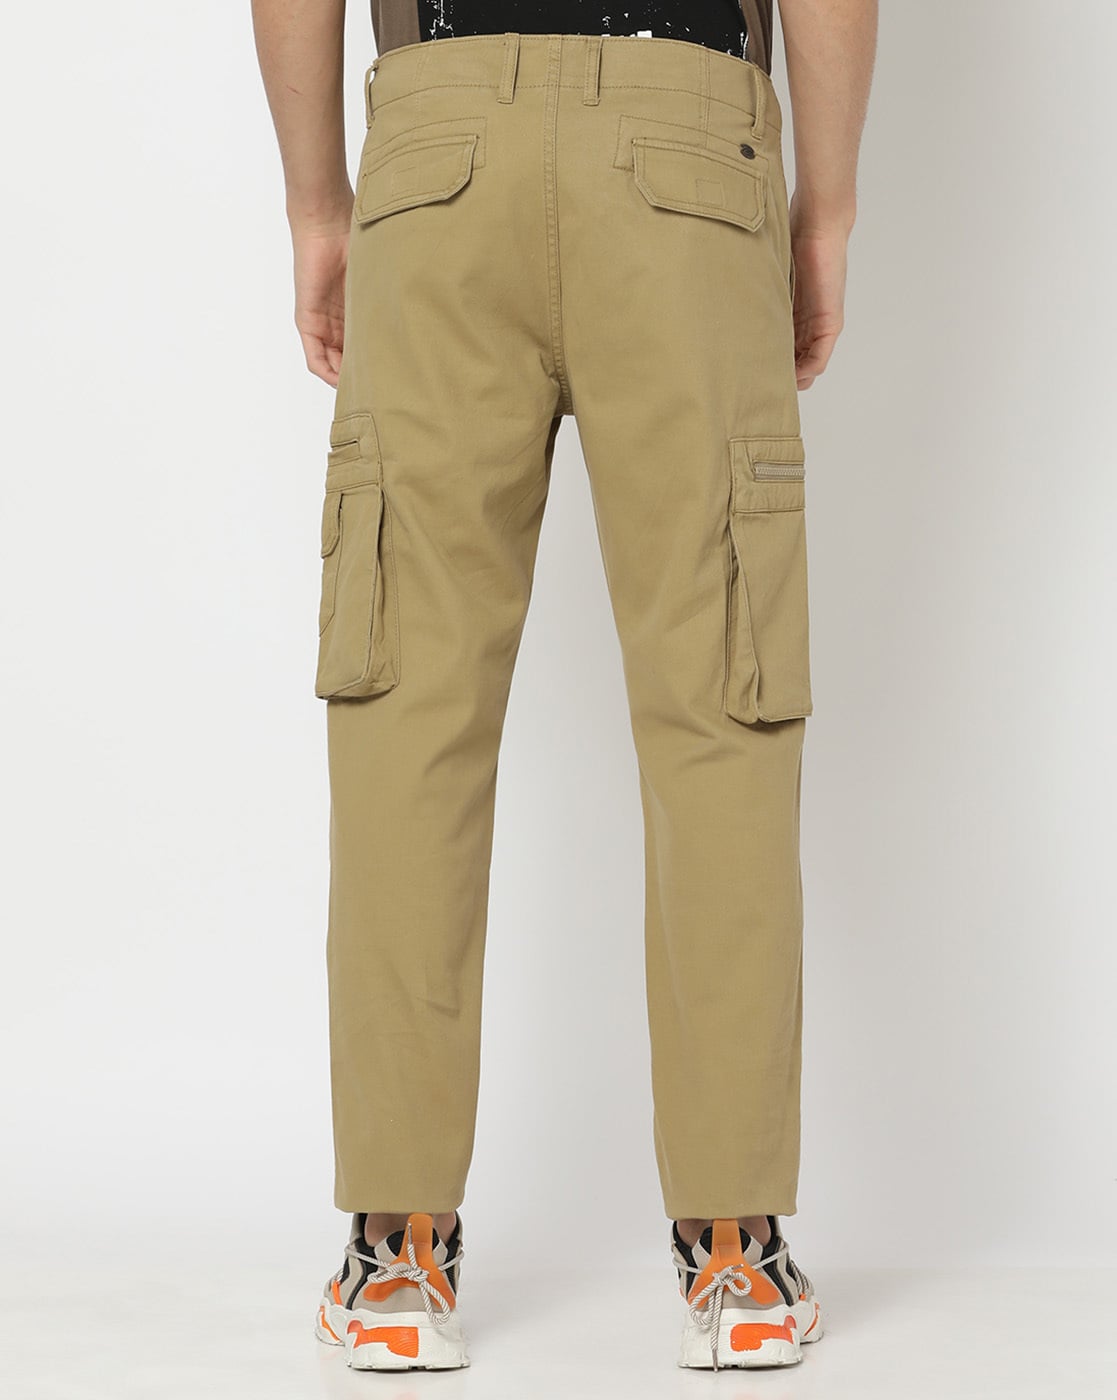 What is the good Online store to buy men's formal pants? - Quora